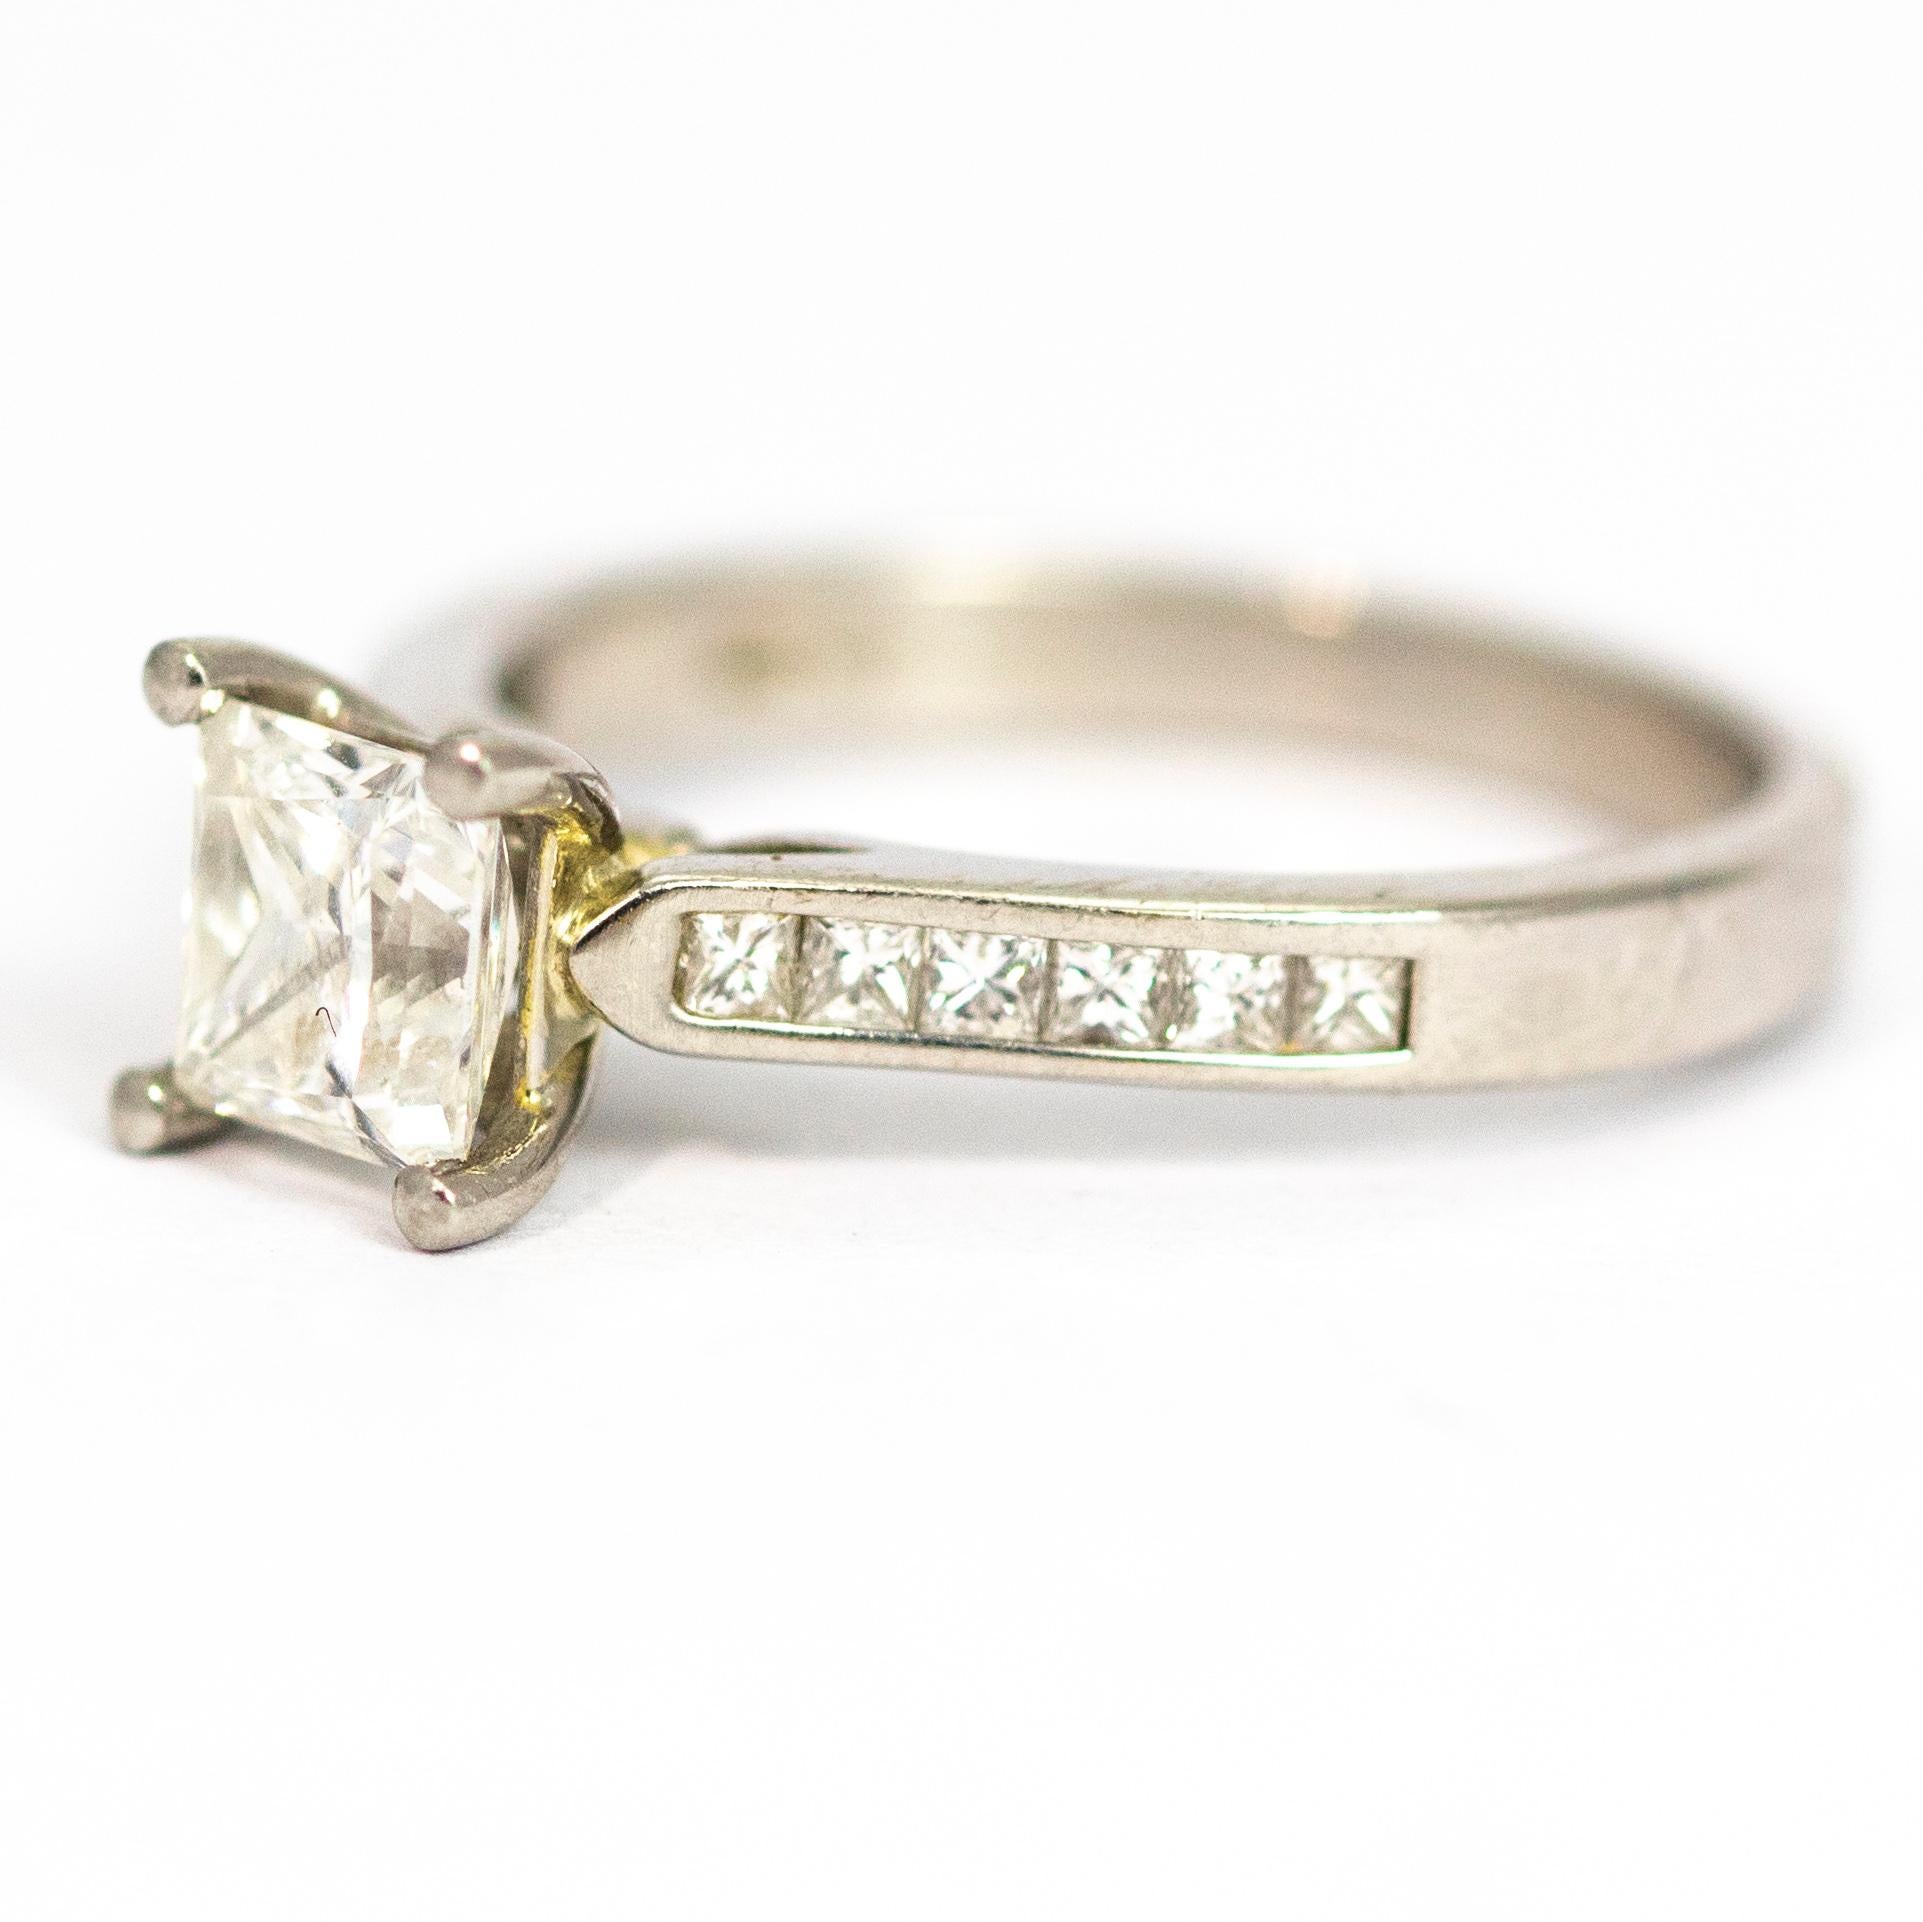 This ring would make the perfect engagement or just add a little sparkle to your everyday wear. The centre diamond is a princess cut which has wonderful sparkle and the shoulders each hold a row of six smaller princess diamonds. The centre stone